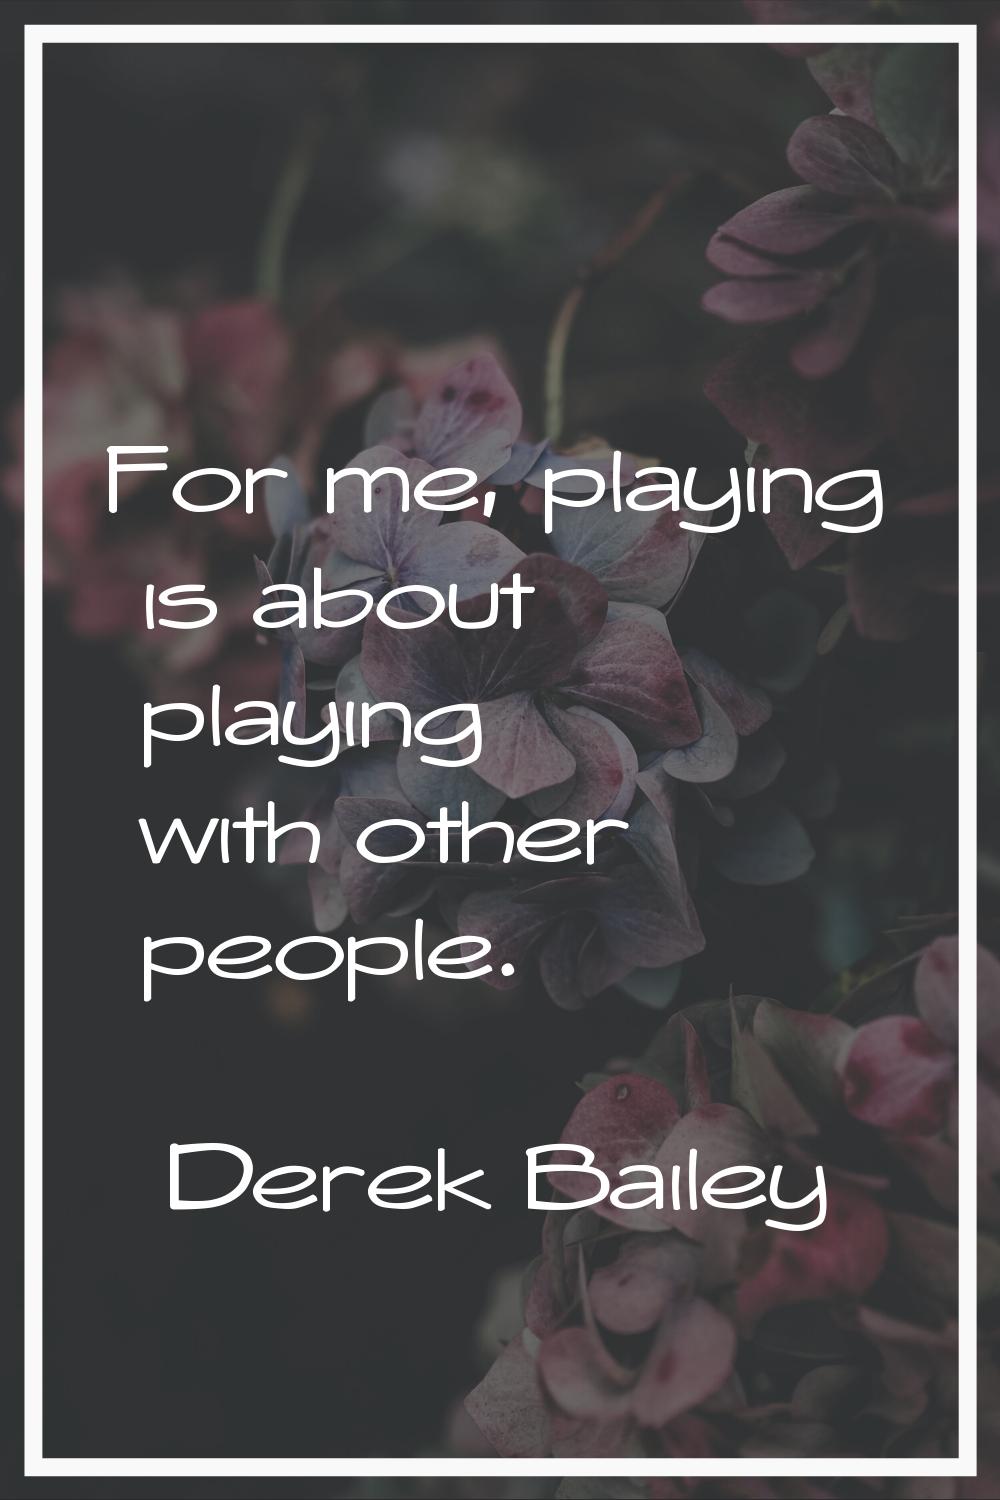 For me, playing is about playing with other people.